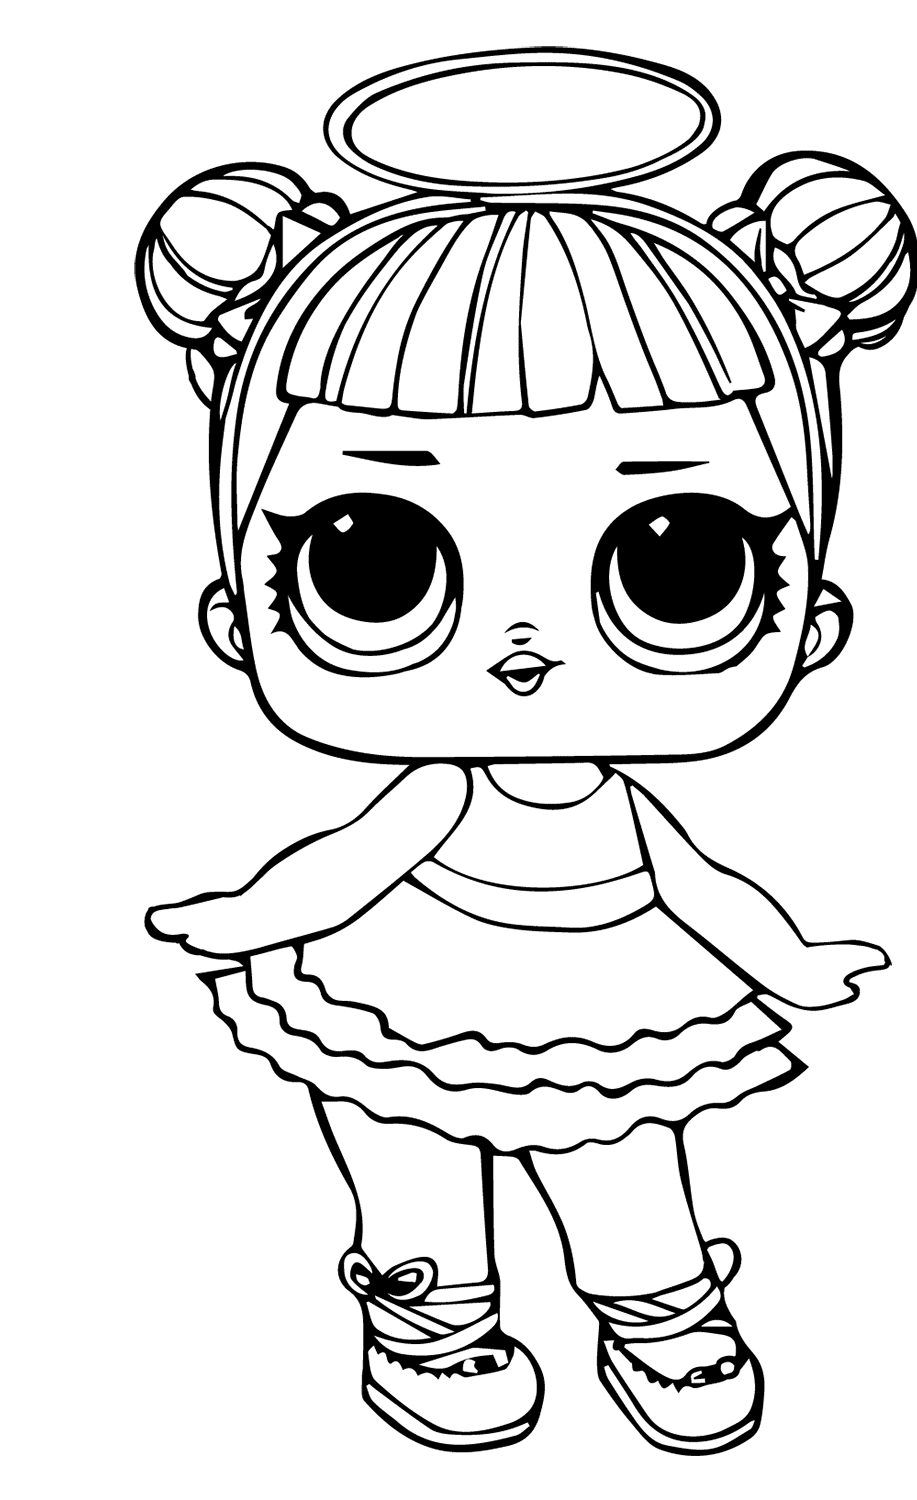 LOL Coloring Pages FREE Printable 117